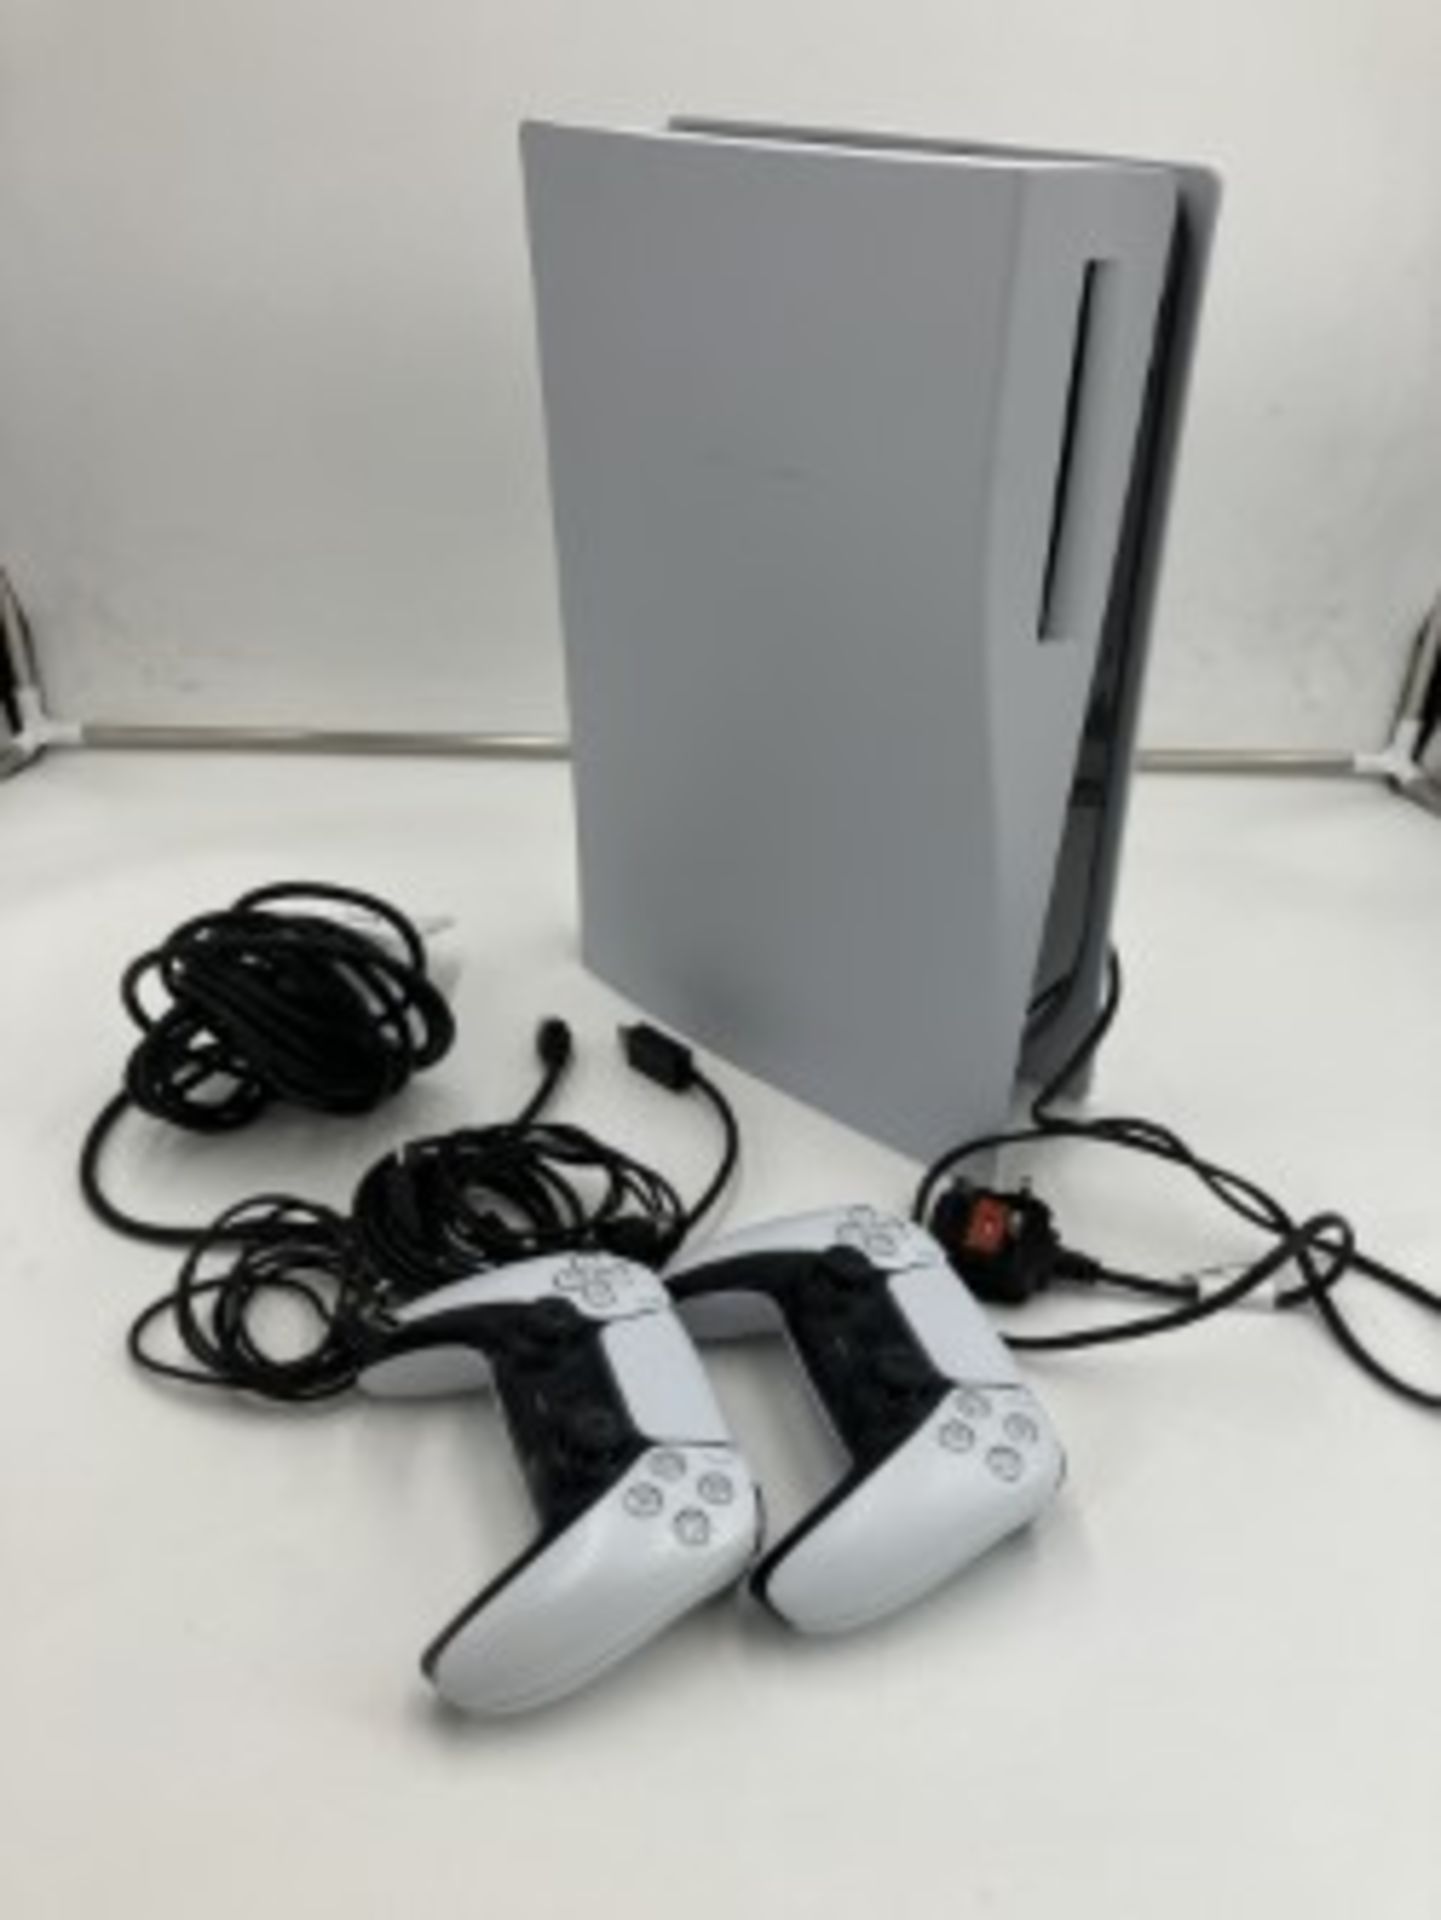 PLAY STATION 5 WITH POWER CABLES & X 2 CONTROLLERS - POWERS ON BUT WE HAVE NOT TESTED FULLY TESTED - Image 4 of 19